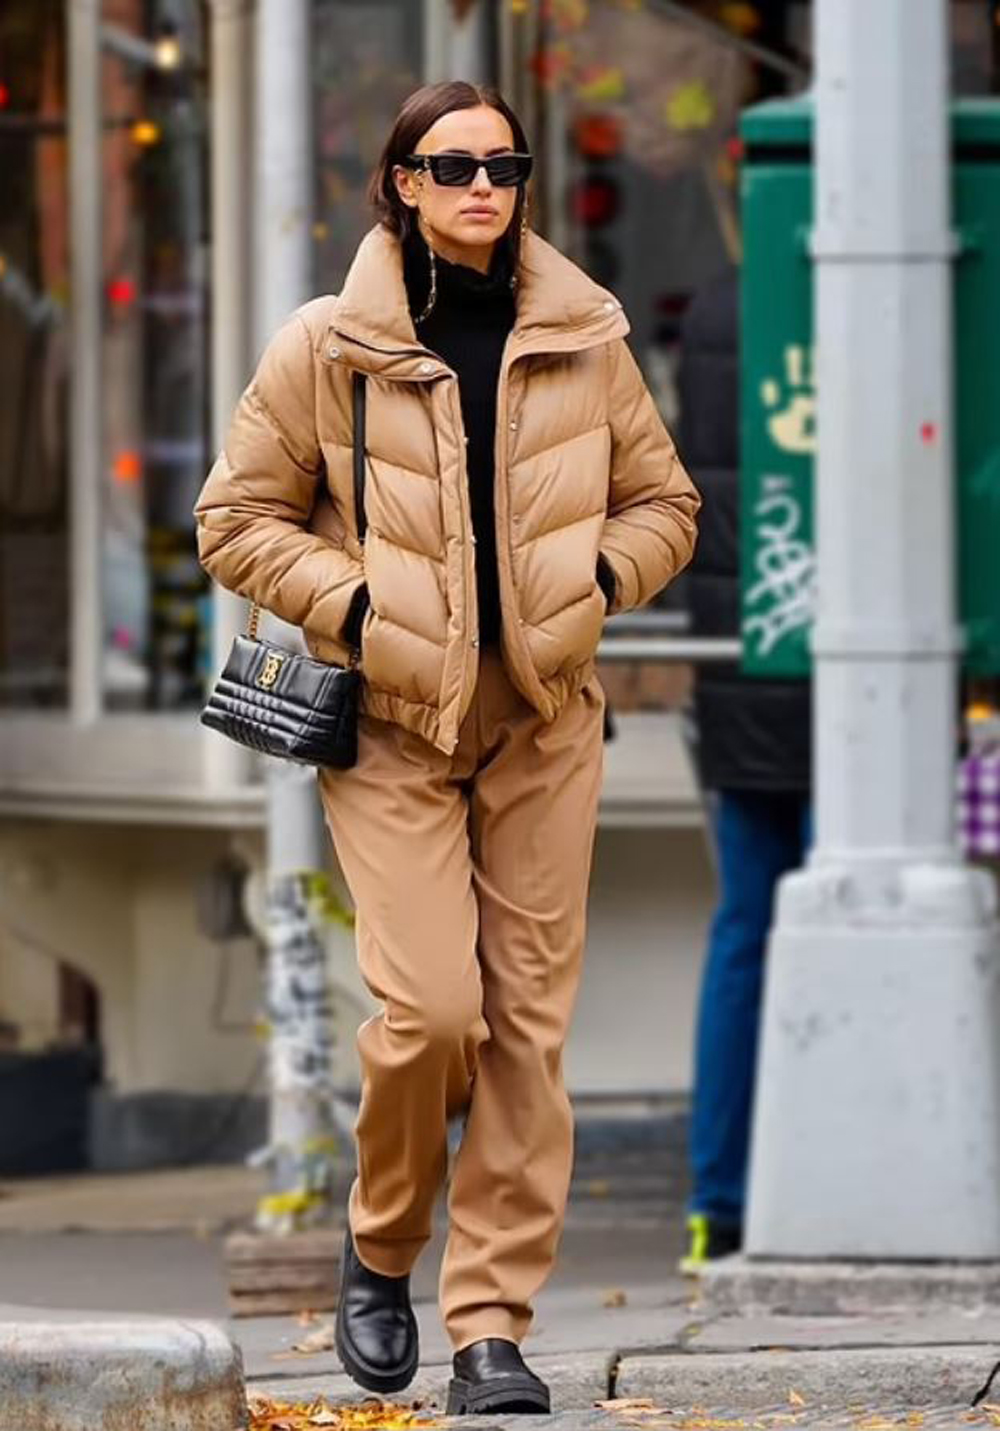 Irina Shayk looks chic as ever in a BOSS leather jacket in NYC | About Her